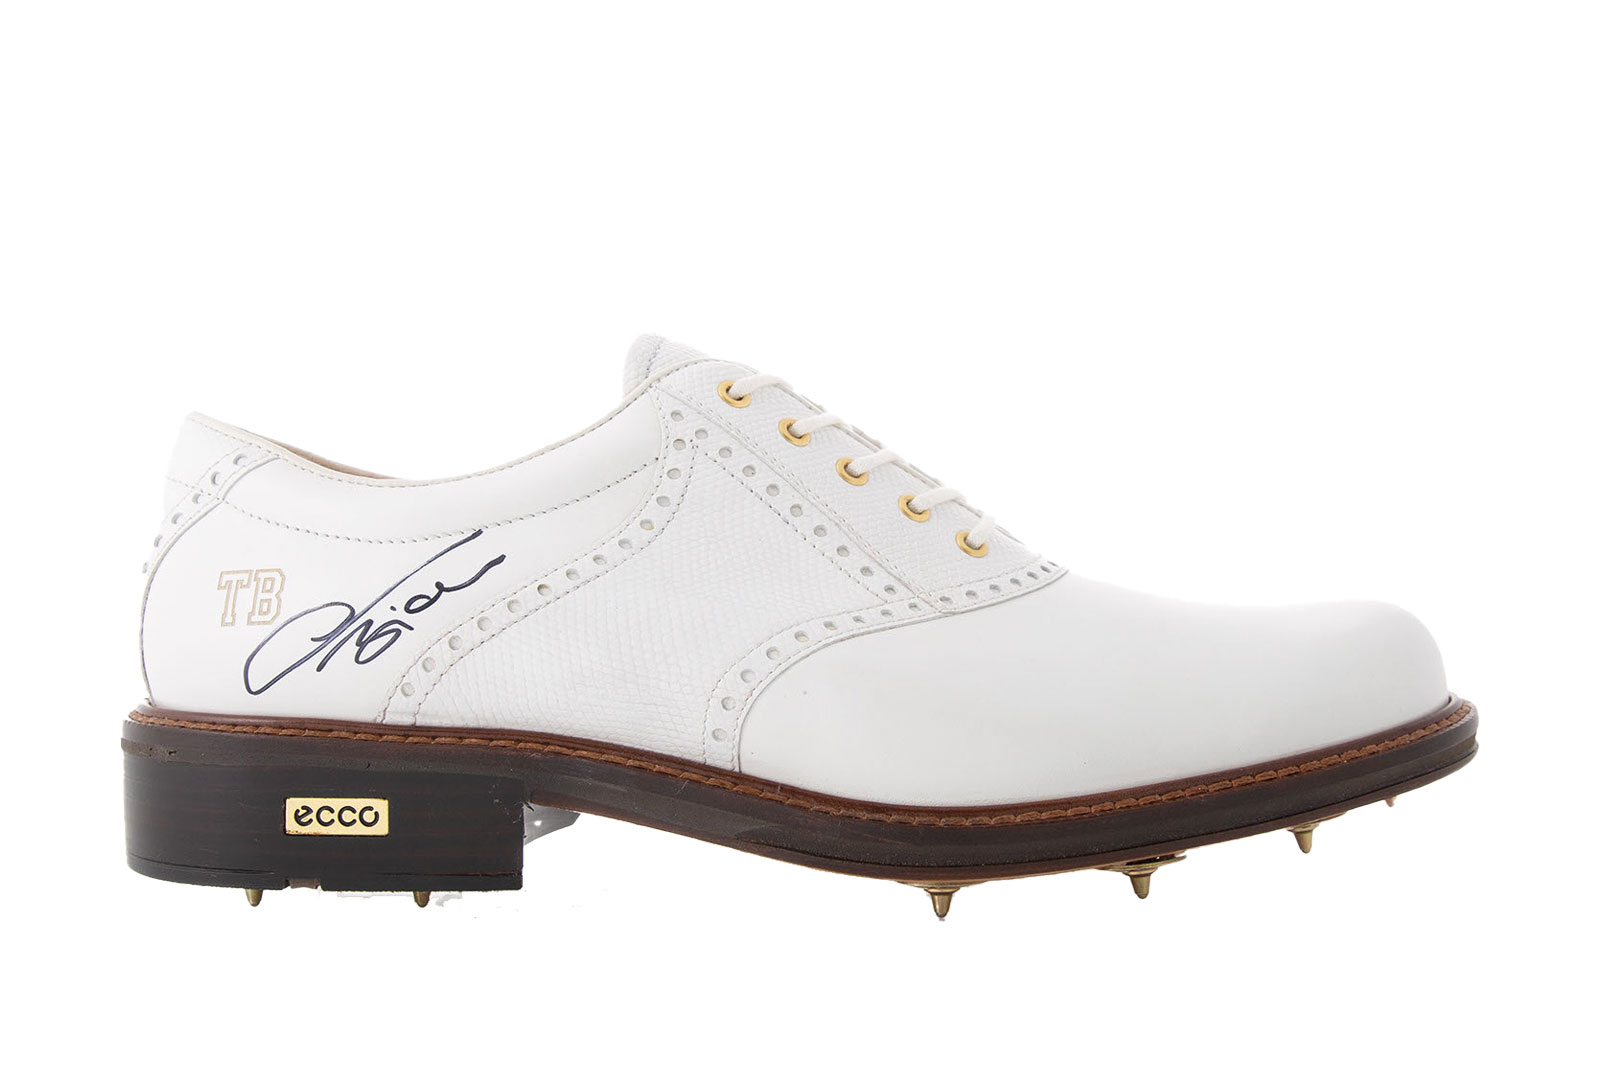 25 Years of ECCO Golf, 2005: ECCO GOLF WORLD CLASS the most admired shoe in the early years